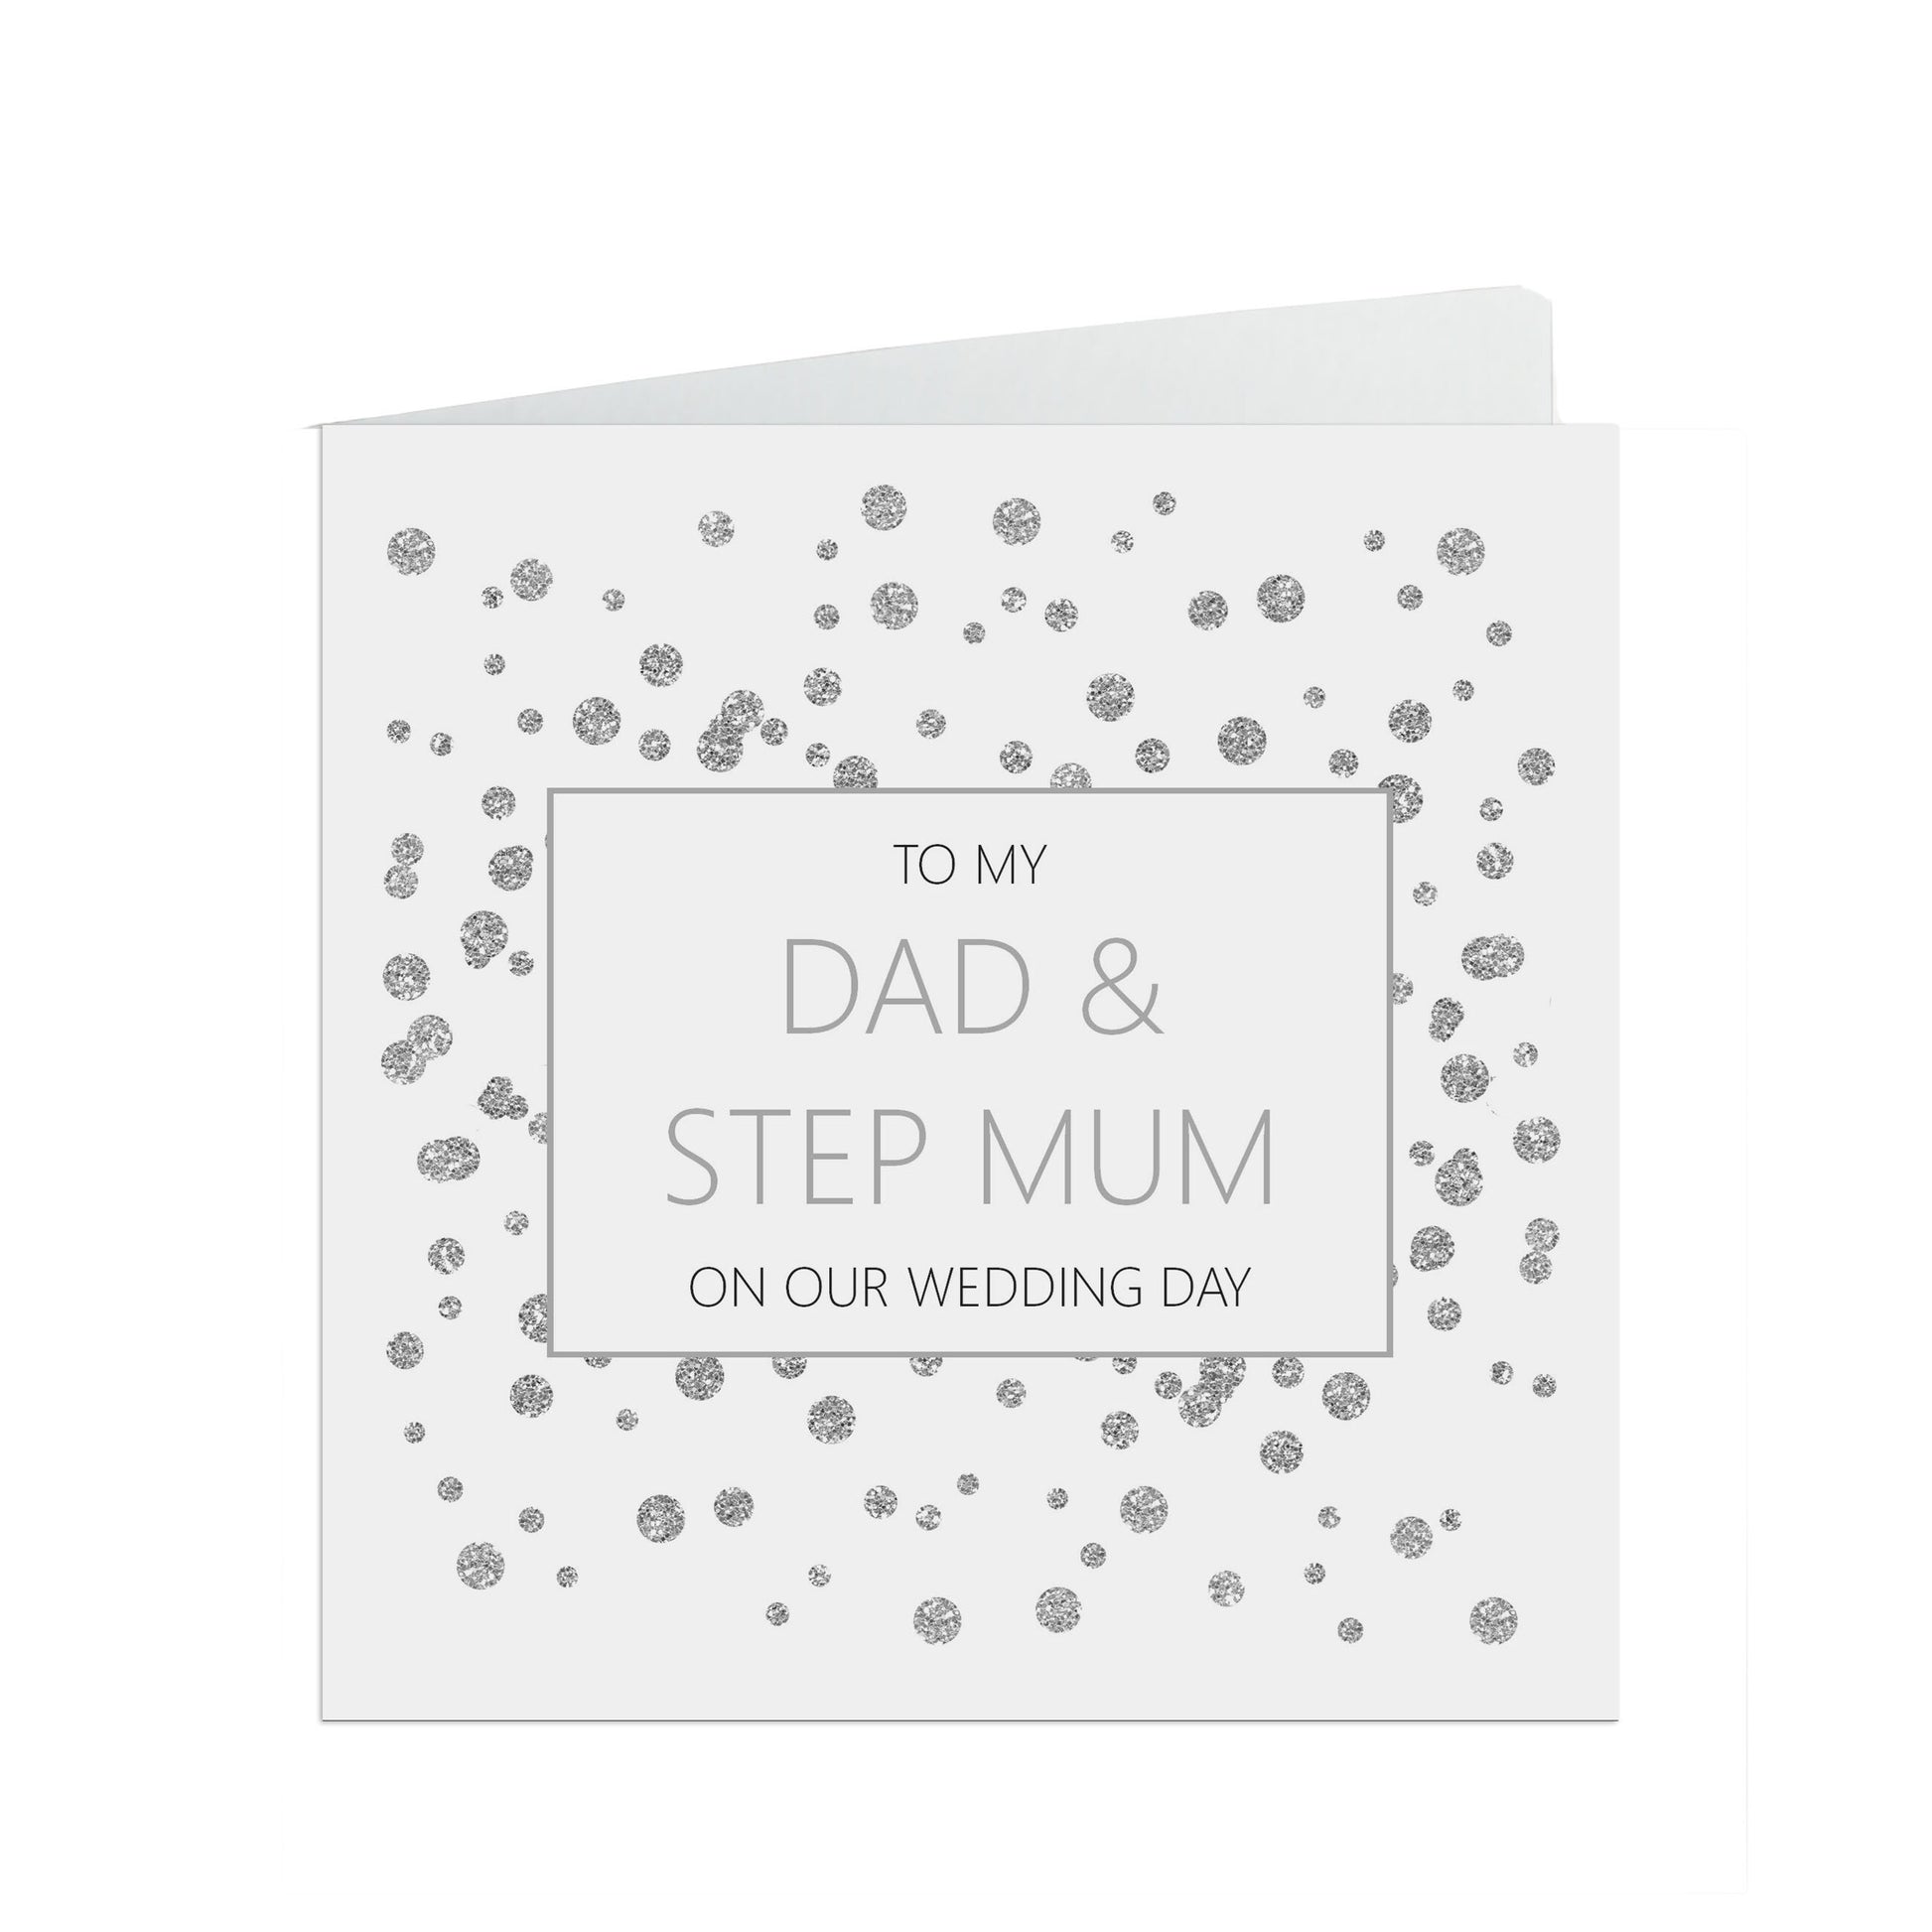 Dad And Step Mum On Our Wedding Day Card, Silver Effect 6x6 Inches With A White Envelope